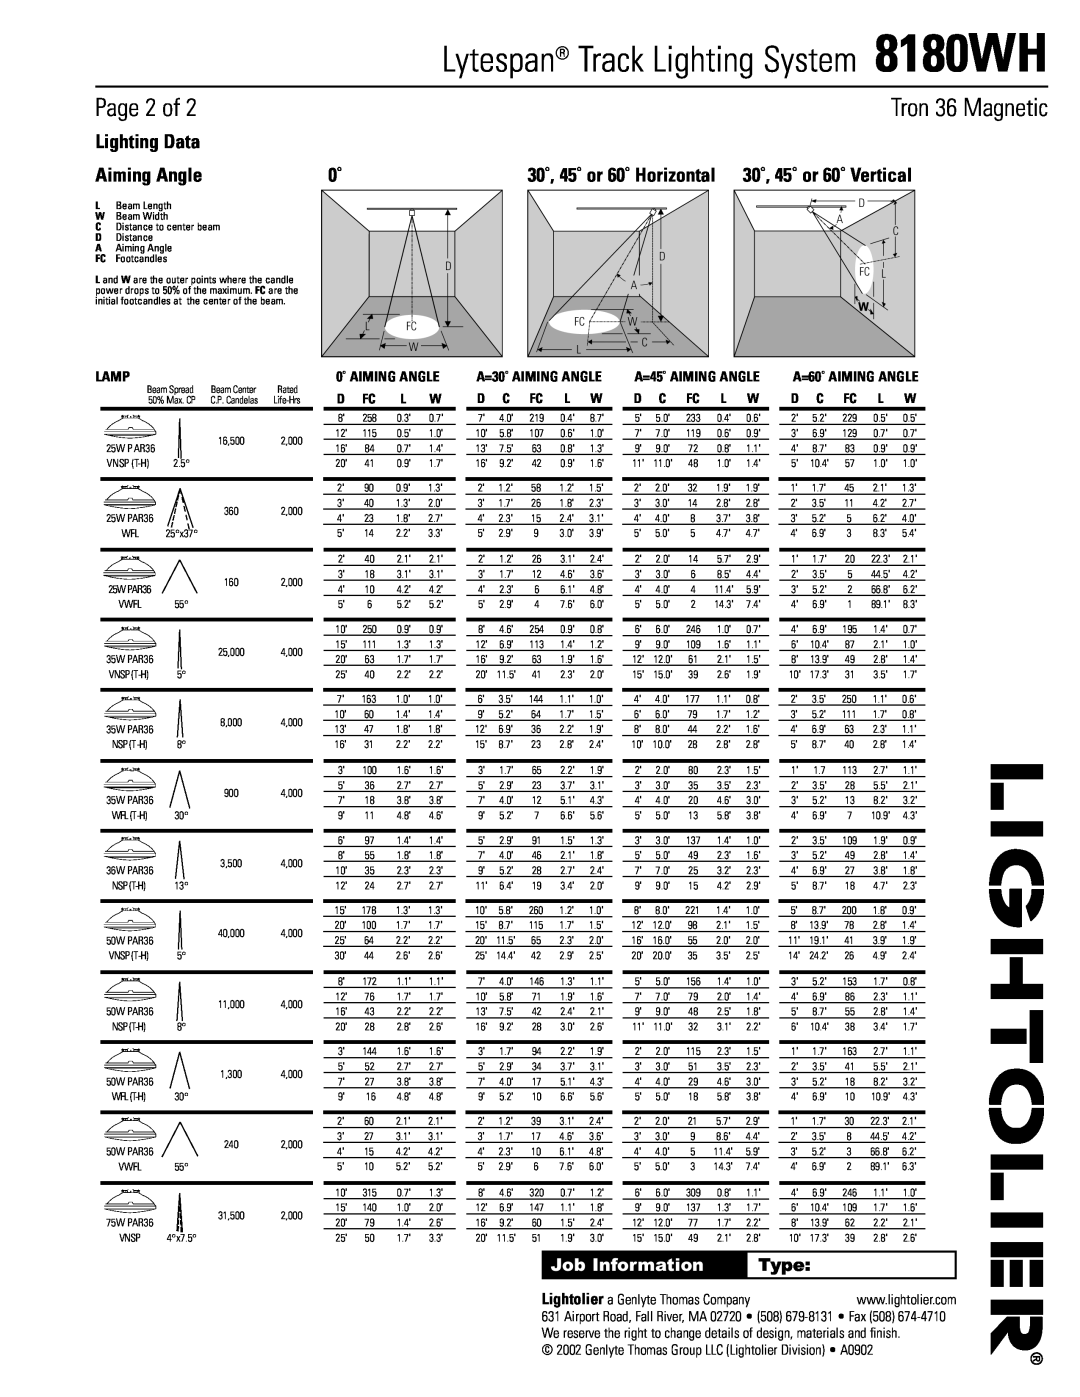 Lightolier 8180WH Page 2 of, Lighting Data, Aiming Angle, 30˚, 45˚ or 60˚ Vertical, Lamp, A=60˚ AIMING ANGLE, Type 